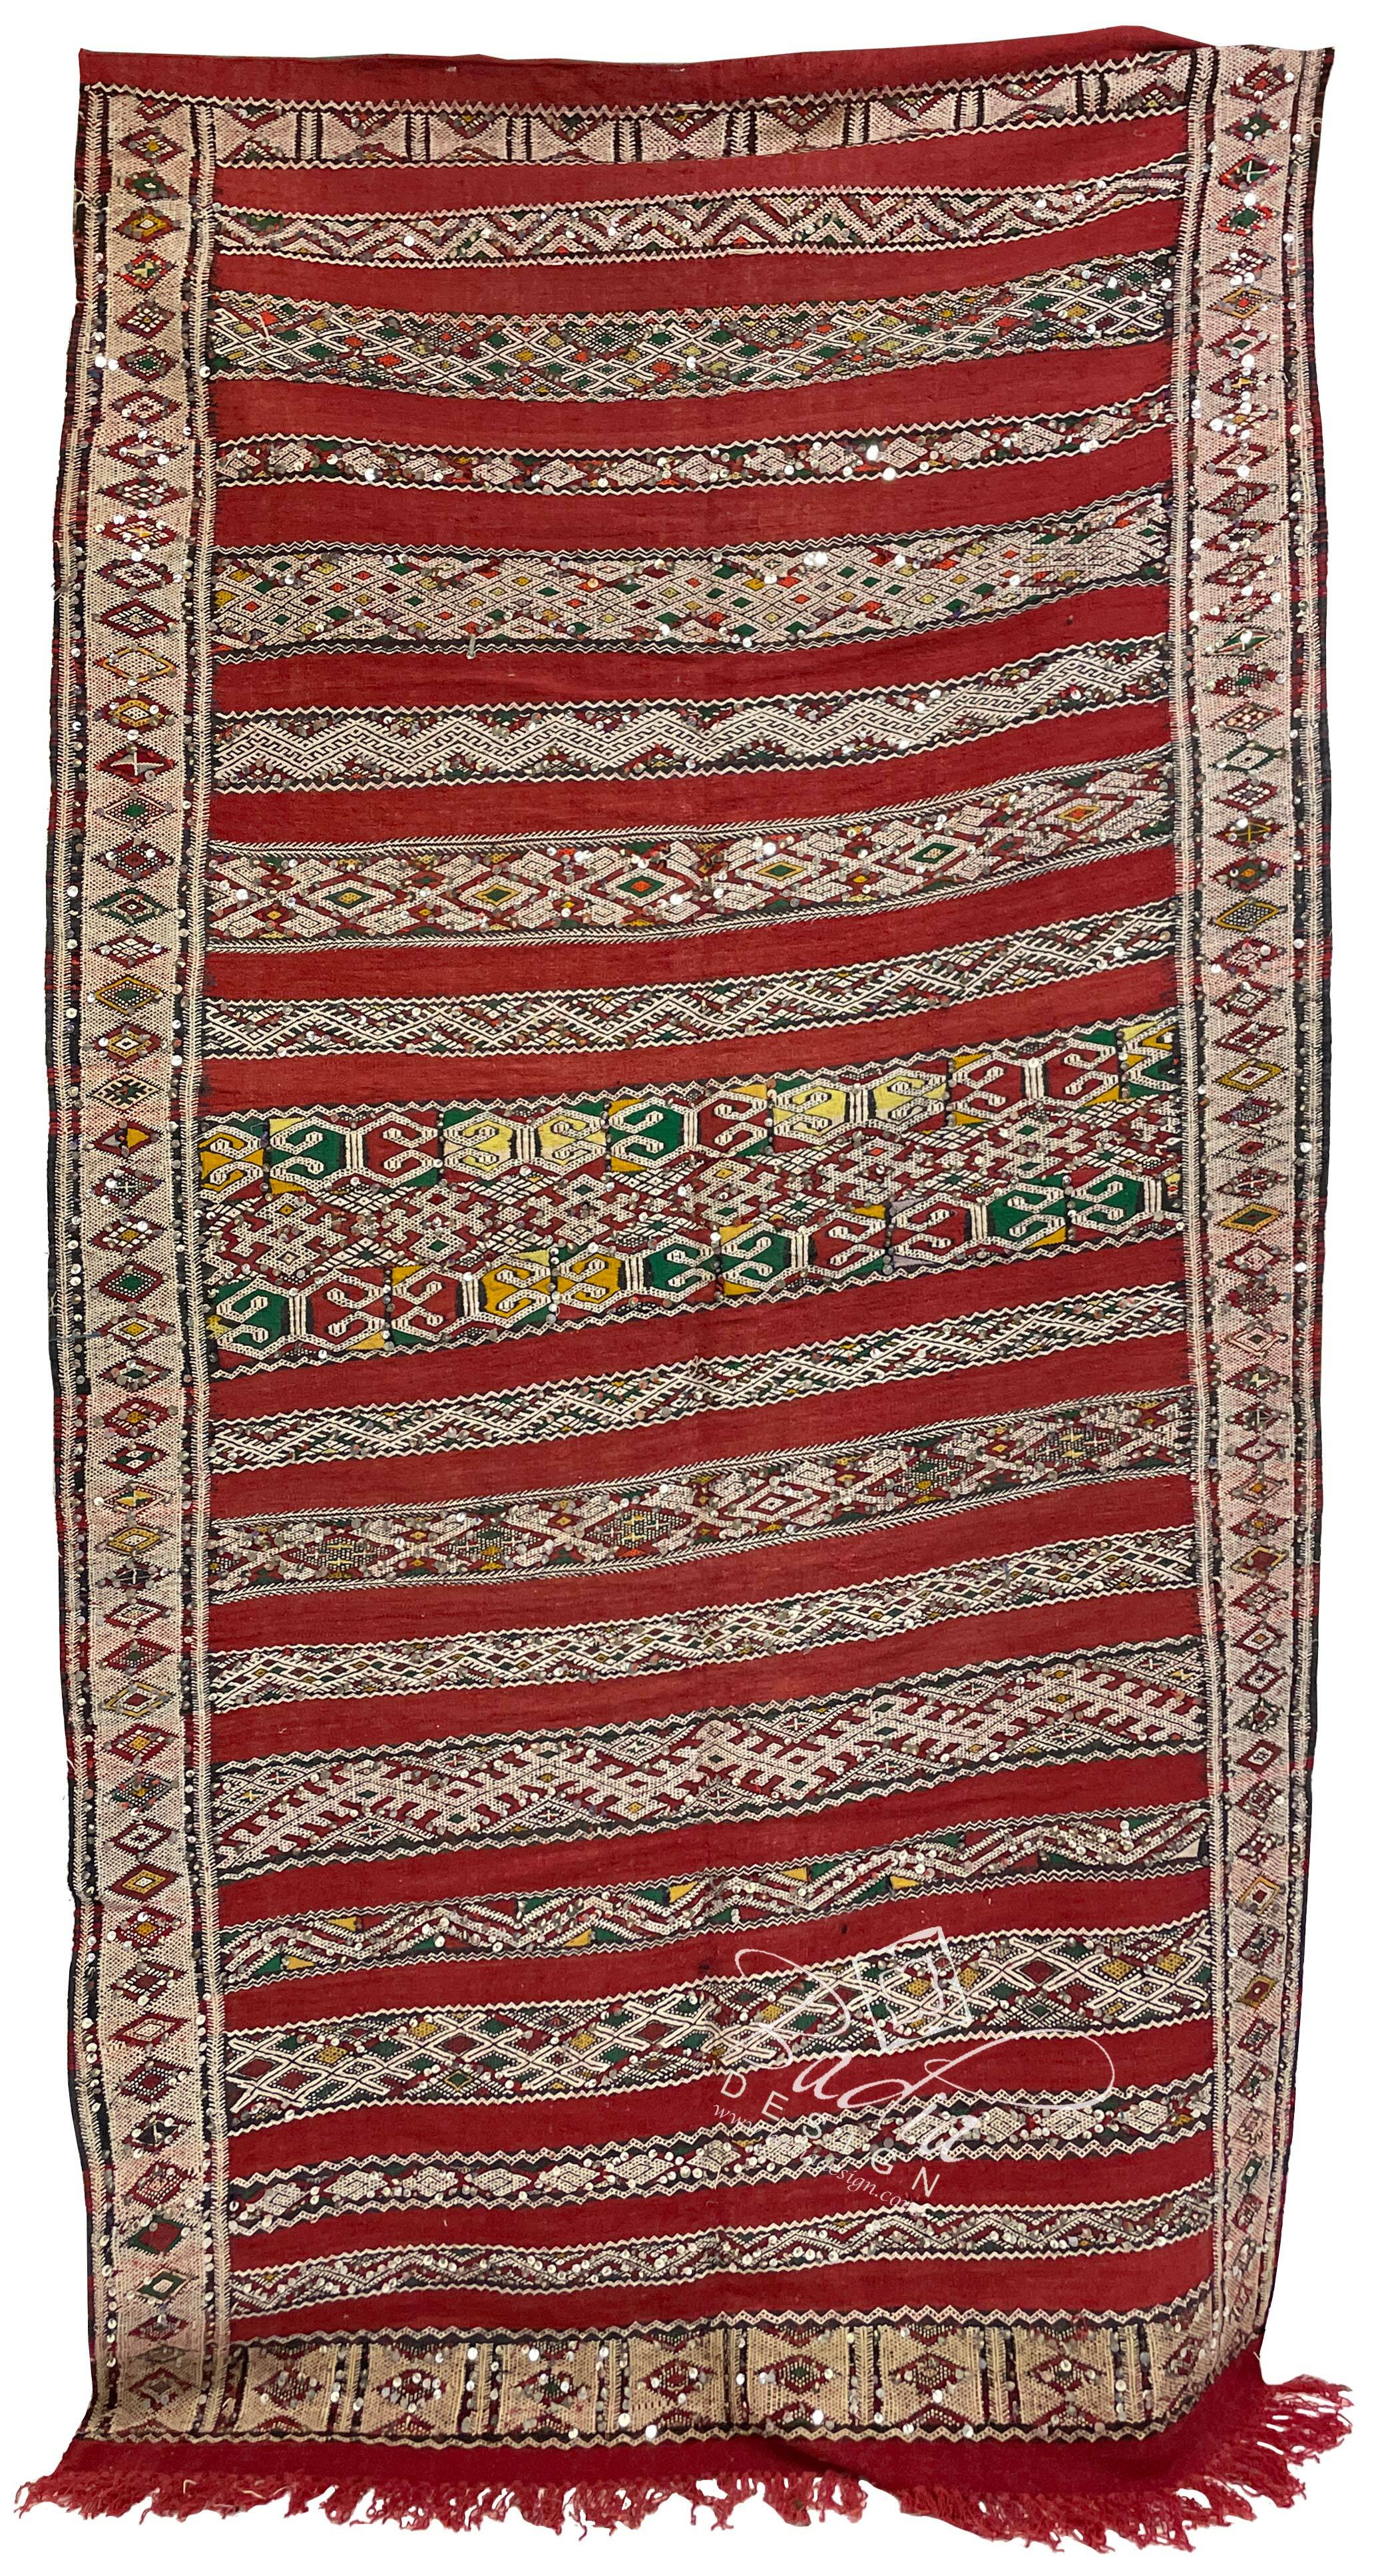 red-handmade-moroccan-kilim-rug-with-silver-sequins-r0269.jpg